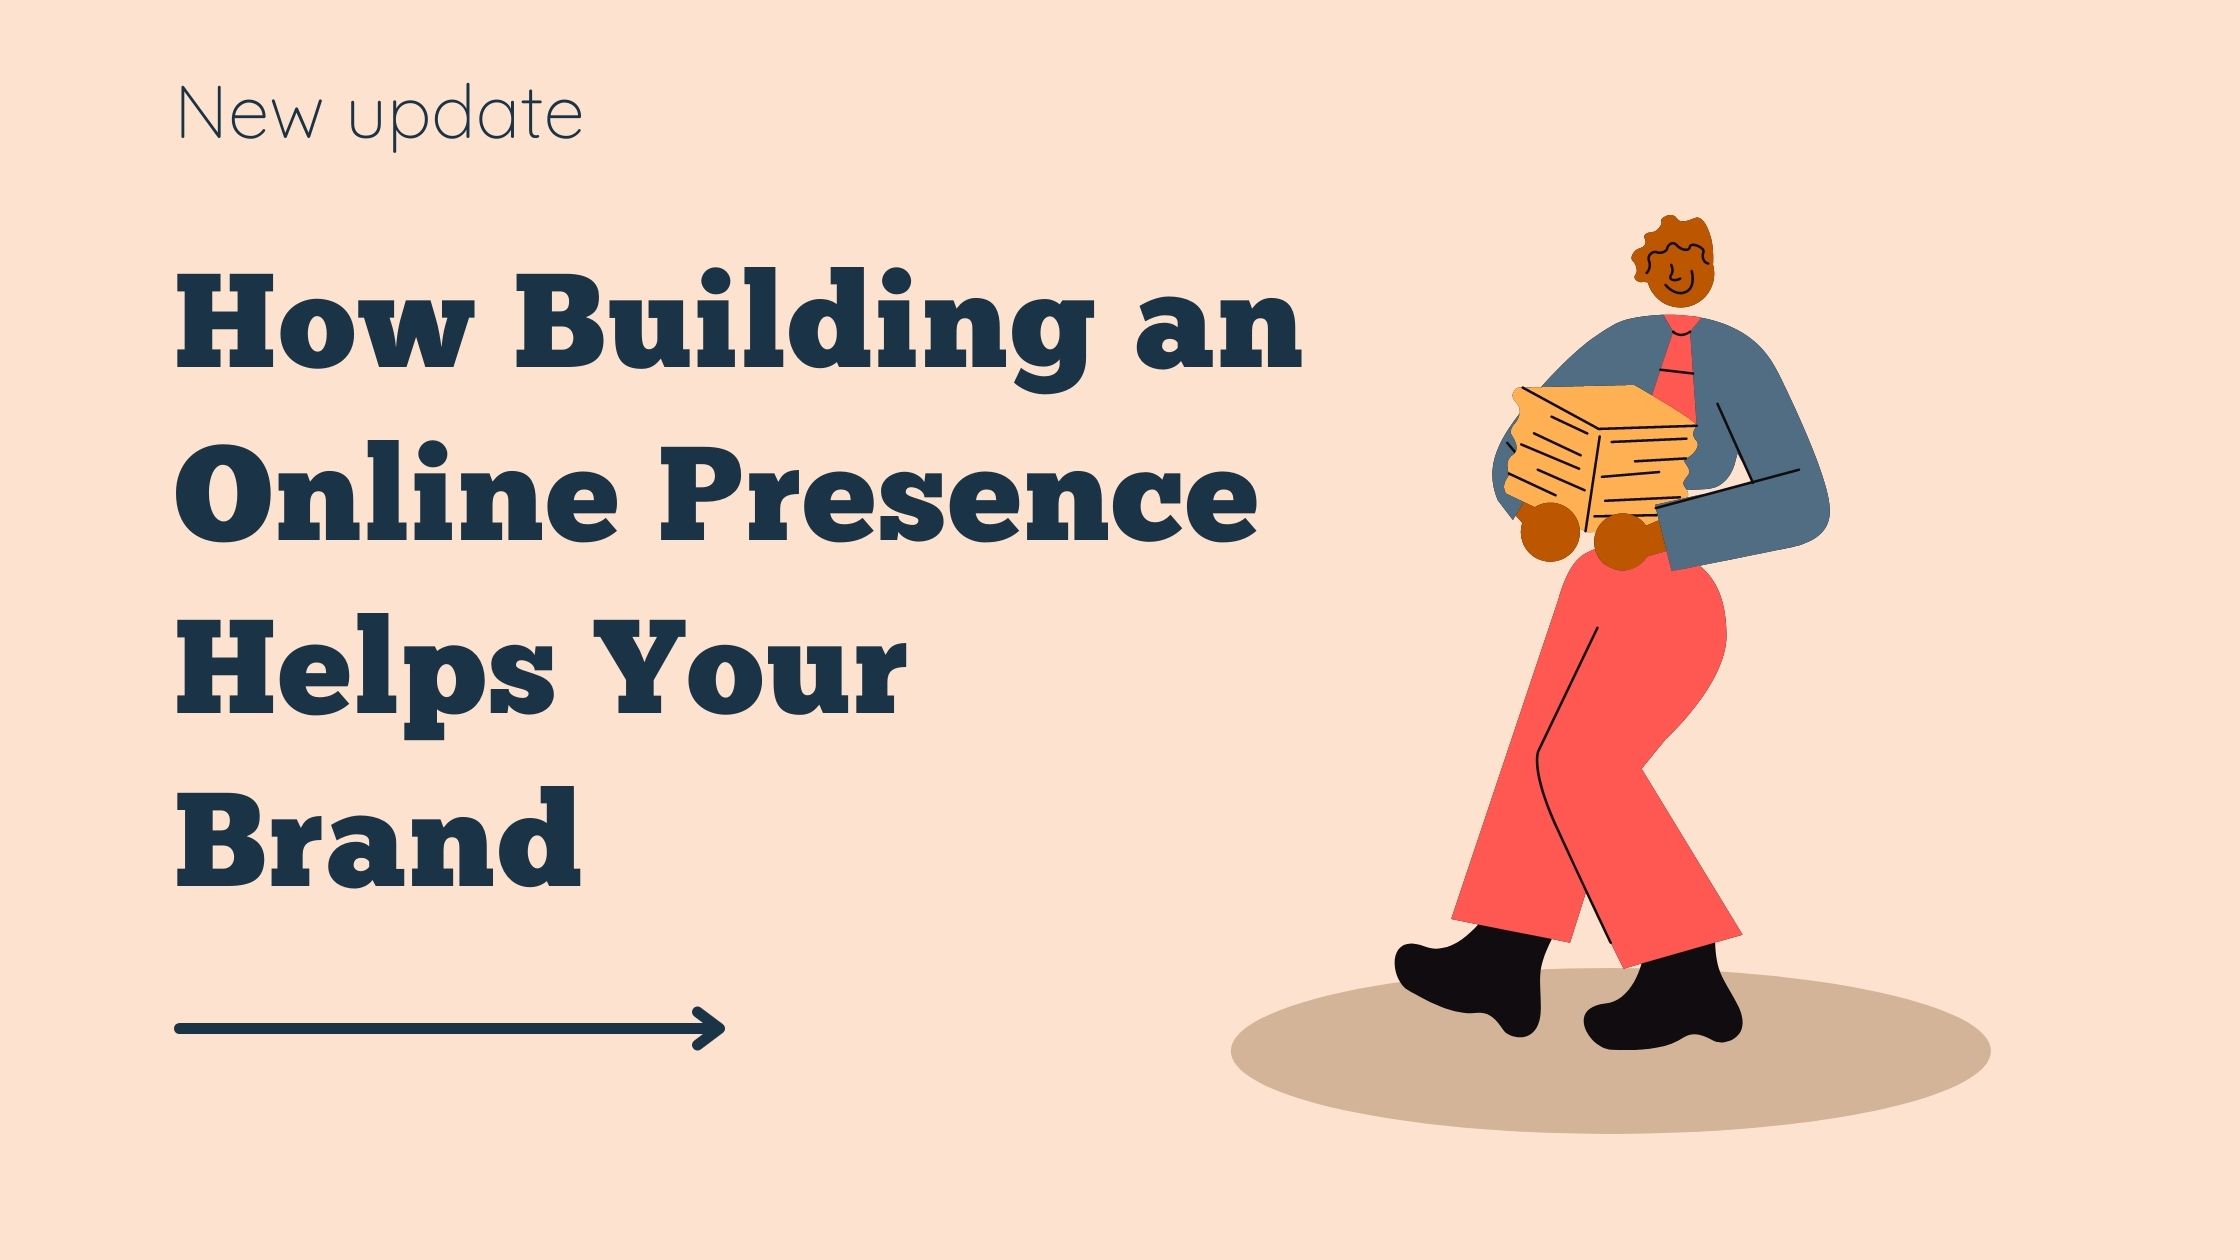 How Building an Online Presence Helps Your Brand